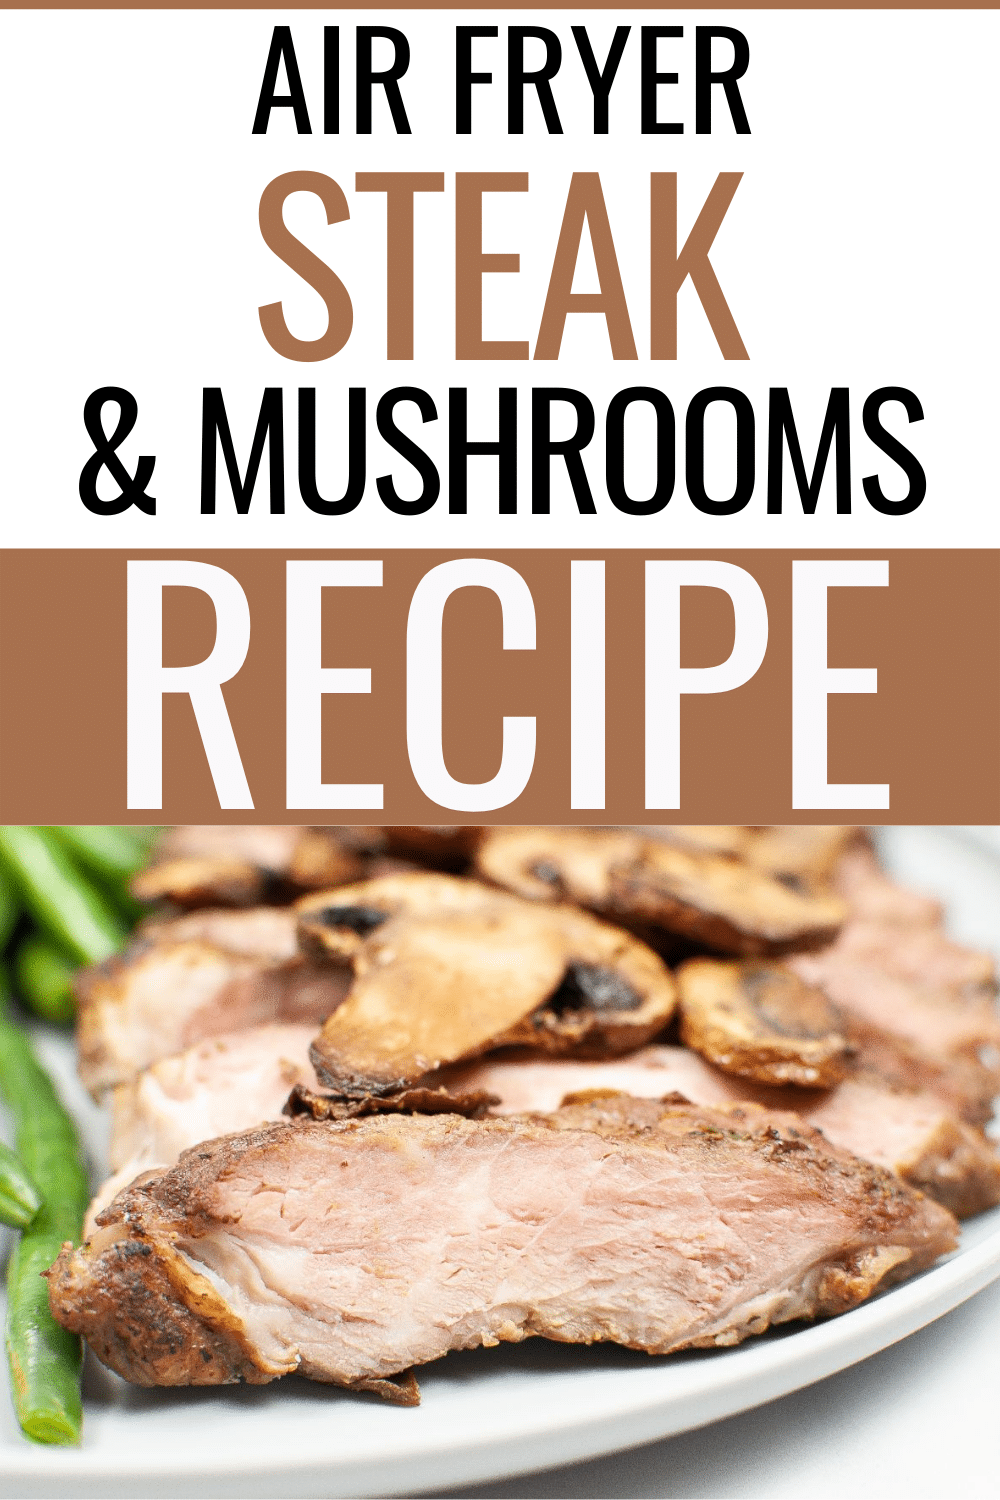 Horizontal image of Air Fryer Steak and Mushrooms at the bottom of the picture with a big text saying "Air Fryer Steak and Mushrooms" at the upper part of the image.